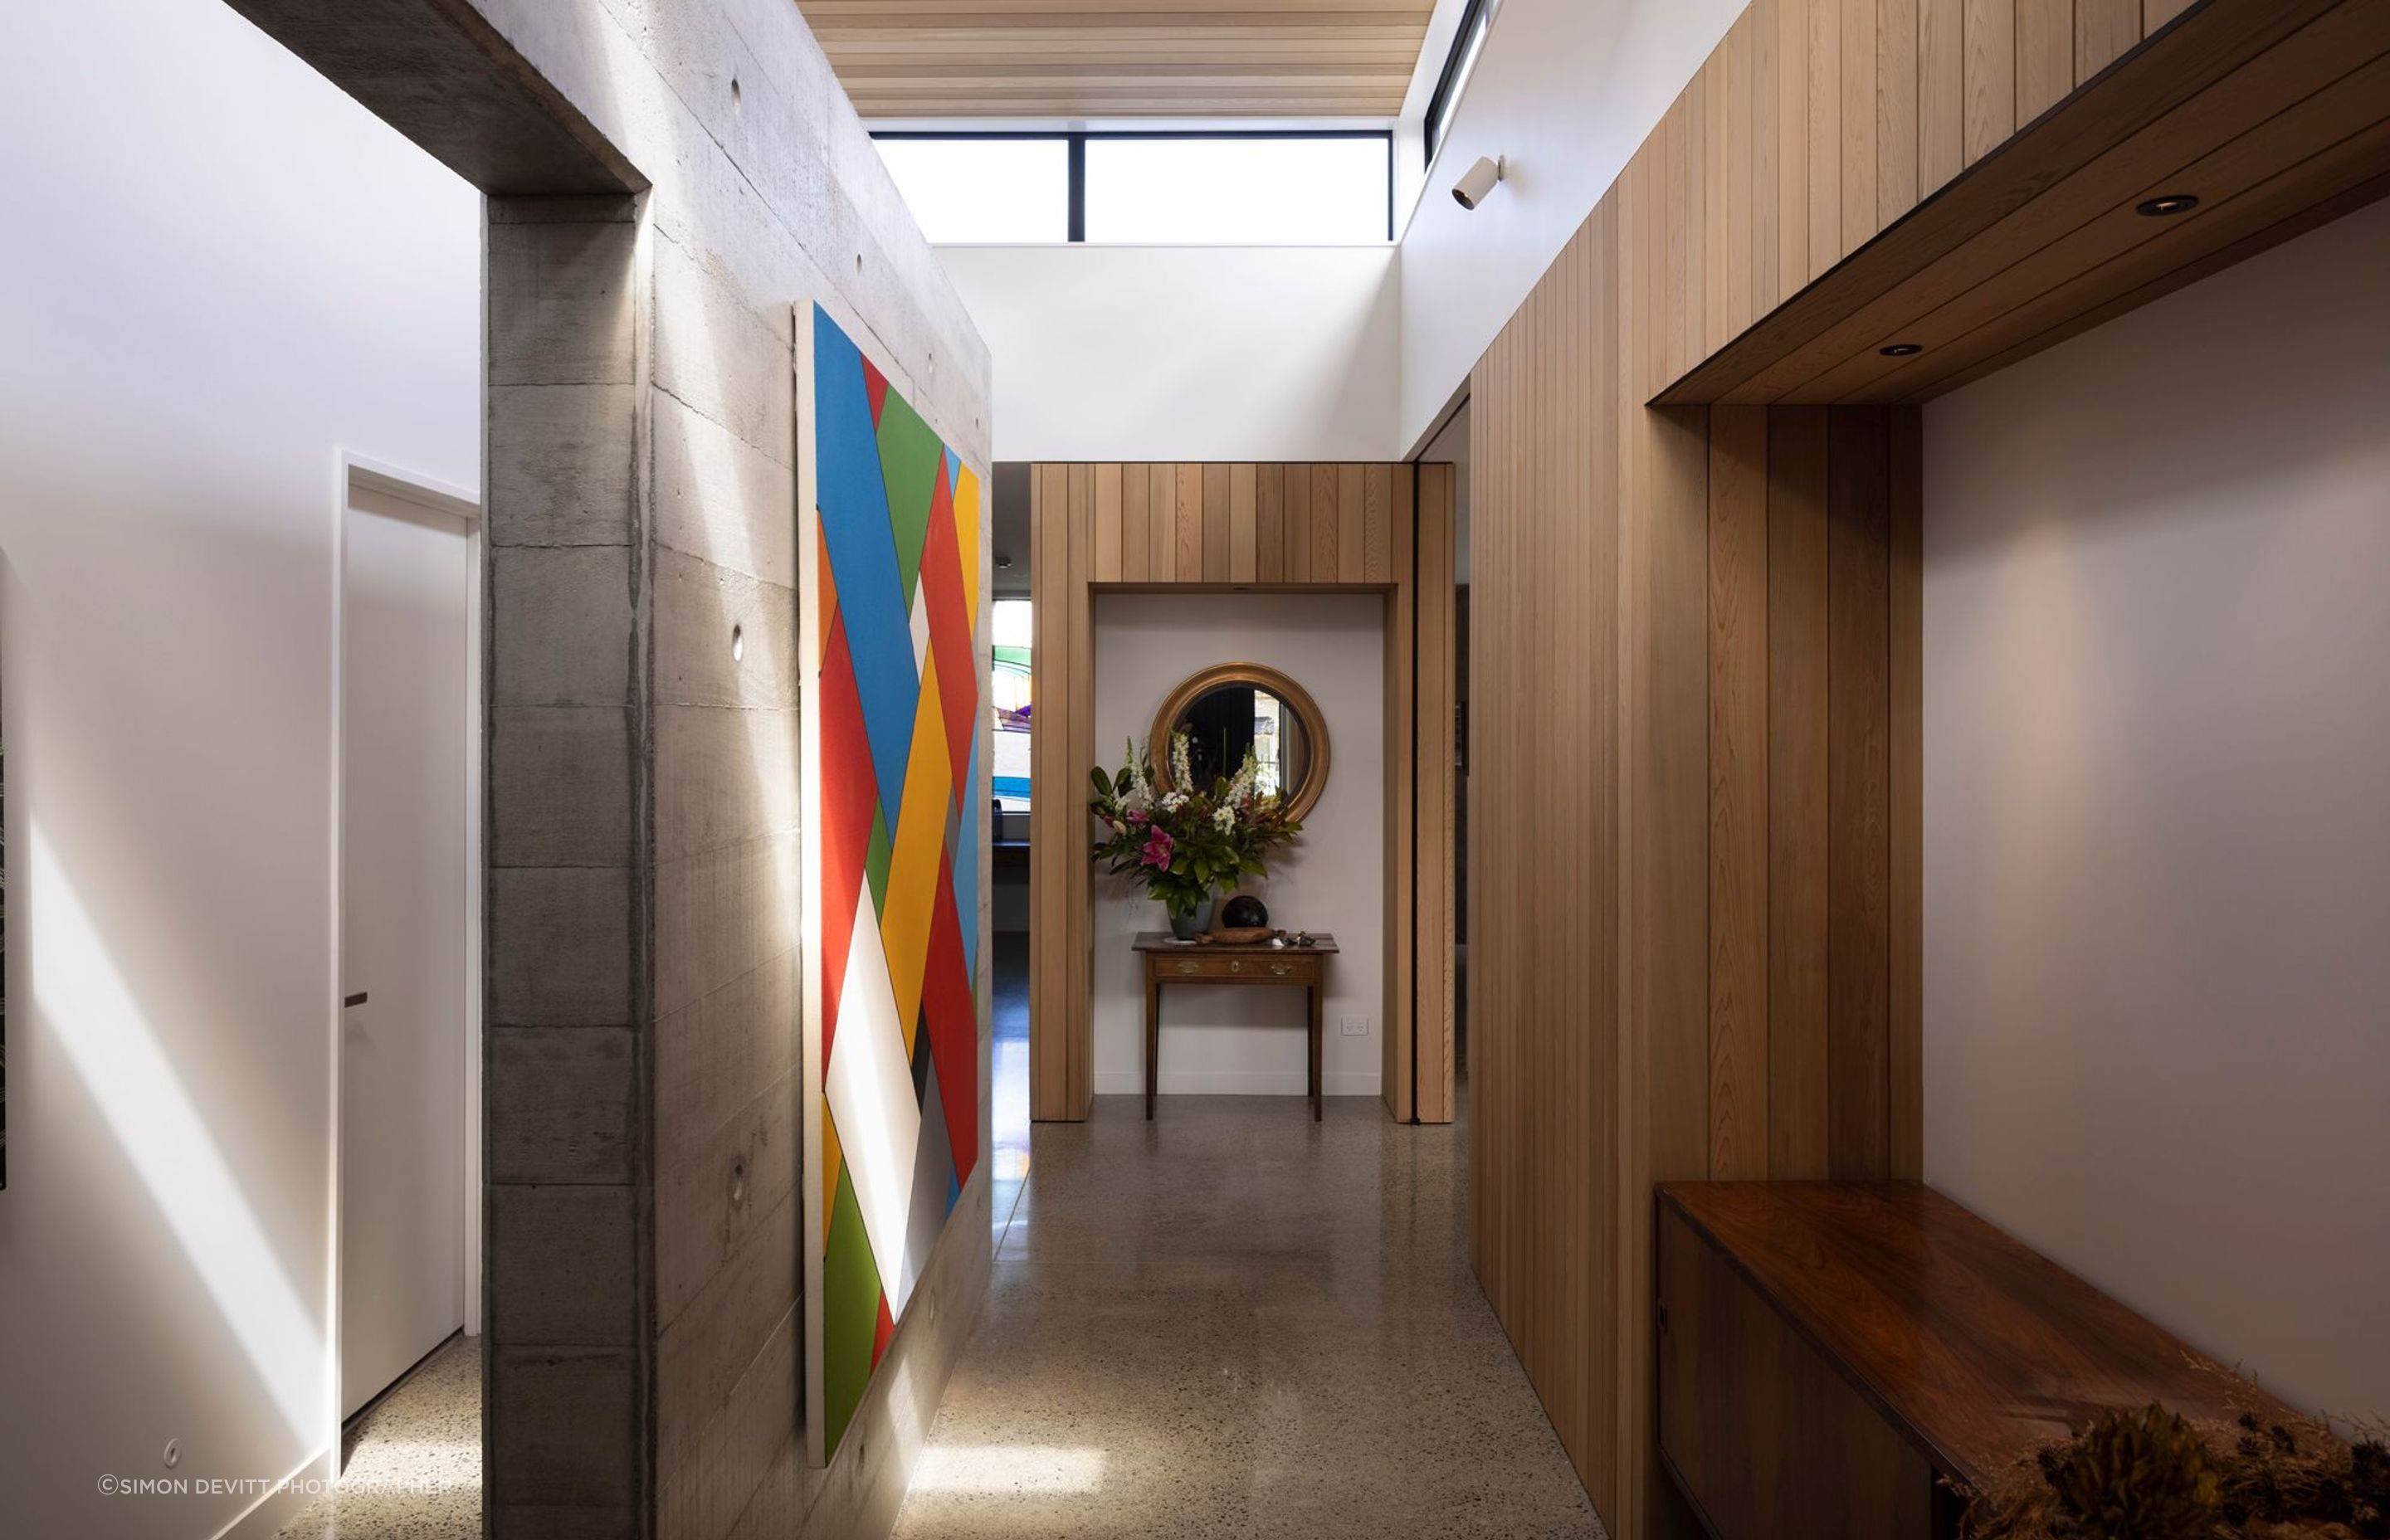 “The clerestory windows really unlock the centre of the house. The stud height is nearly four metres in here, and glazed all around. The concrete wall down the middle is a very strong pivot point between all parts of the house and becomes a gallery space.”